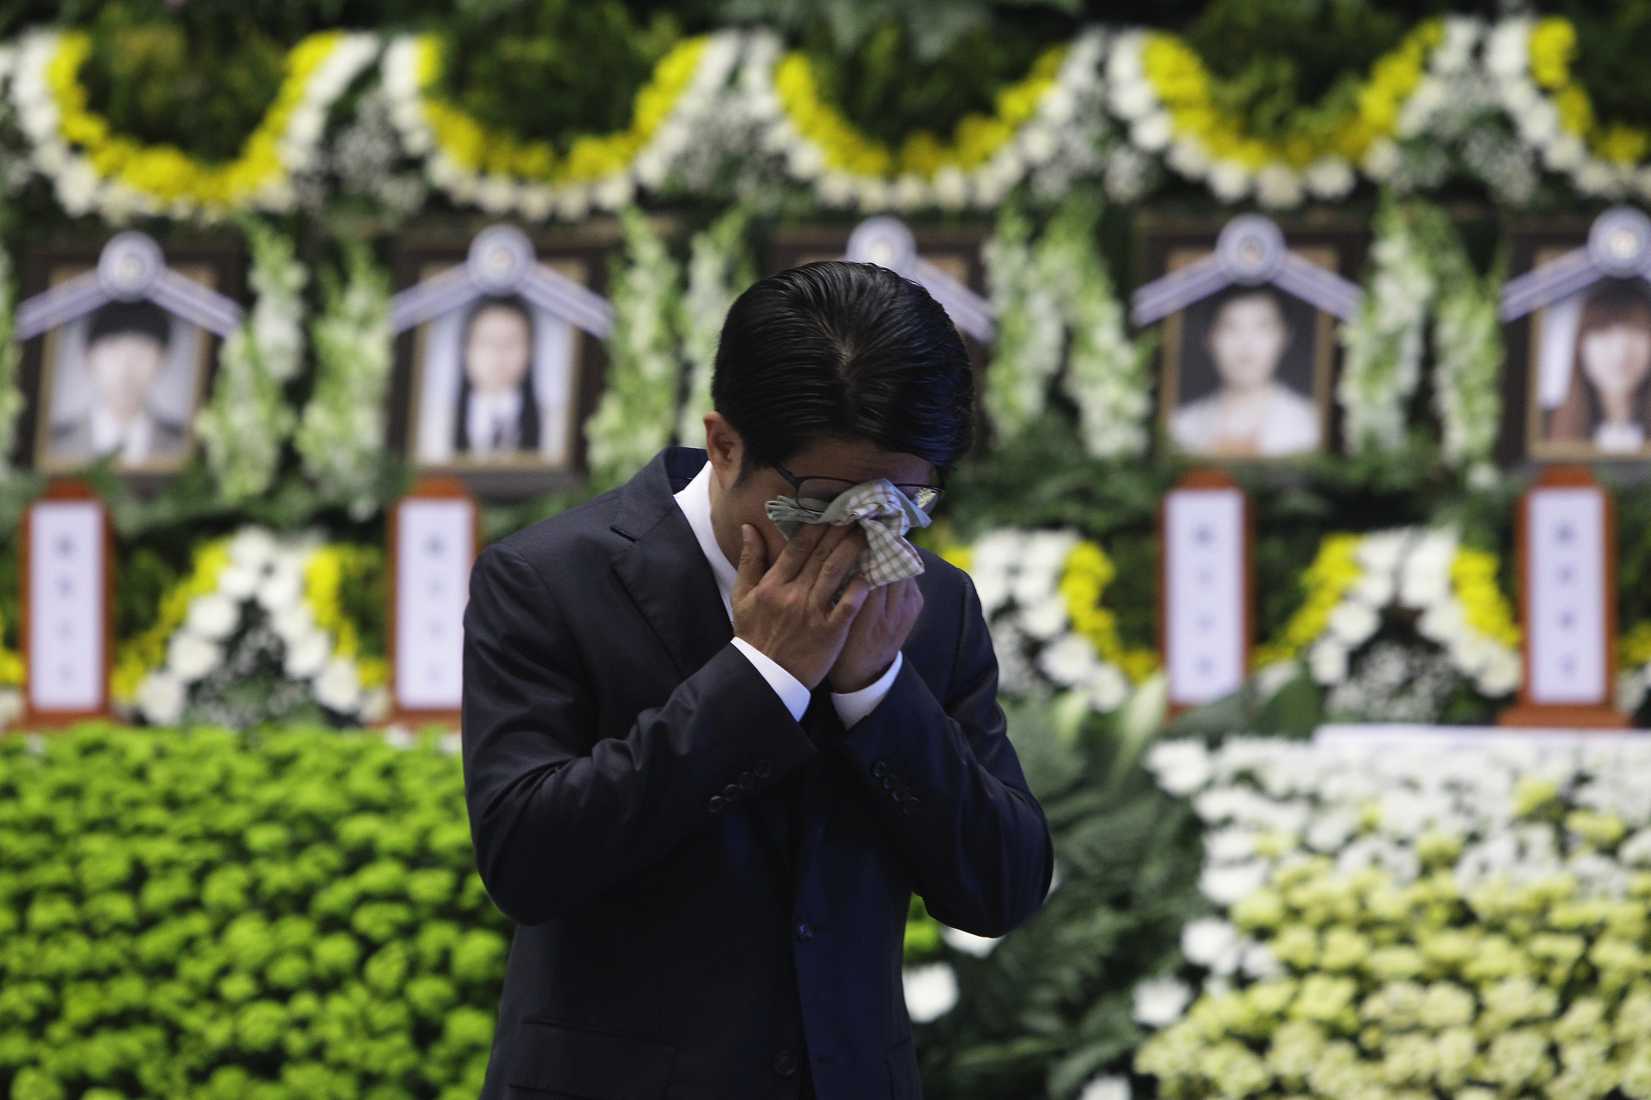 A man weeps after tribute at a group memorial altar for victims of sunken passengers ship at the Ansan Olympic Memorial Hall on April 23, 2014 in Ansan, South Korea. (Chung Sung-Jun—Getty Images)